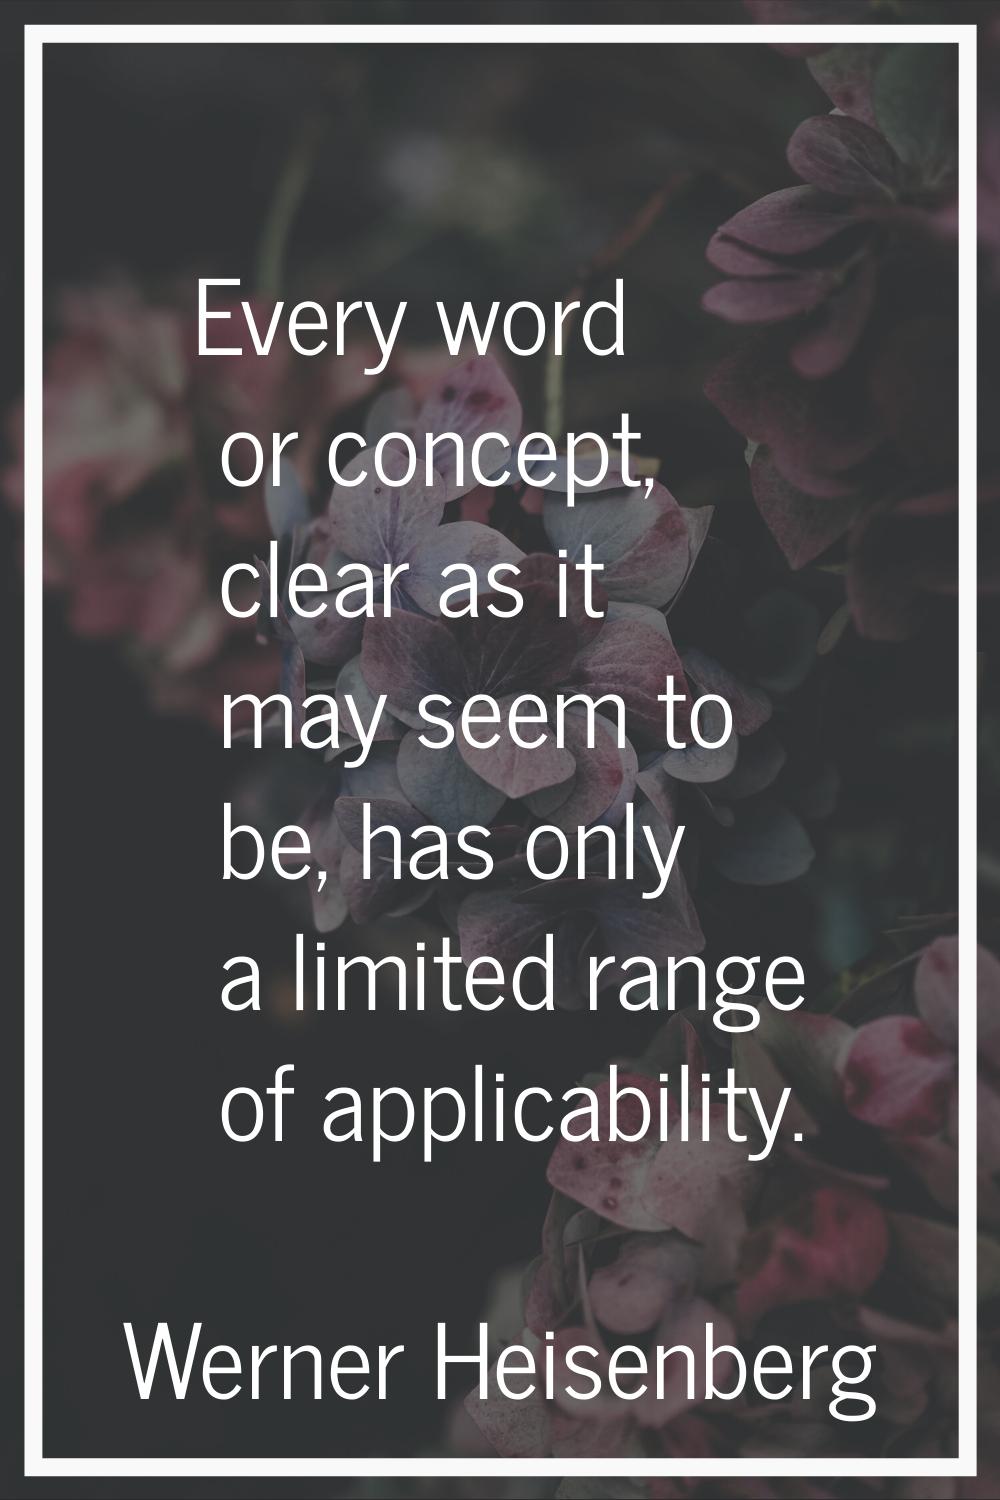 Every word or concept, clear as it may seem to be, has only a limited range of applicability.